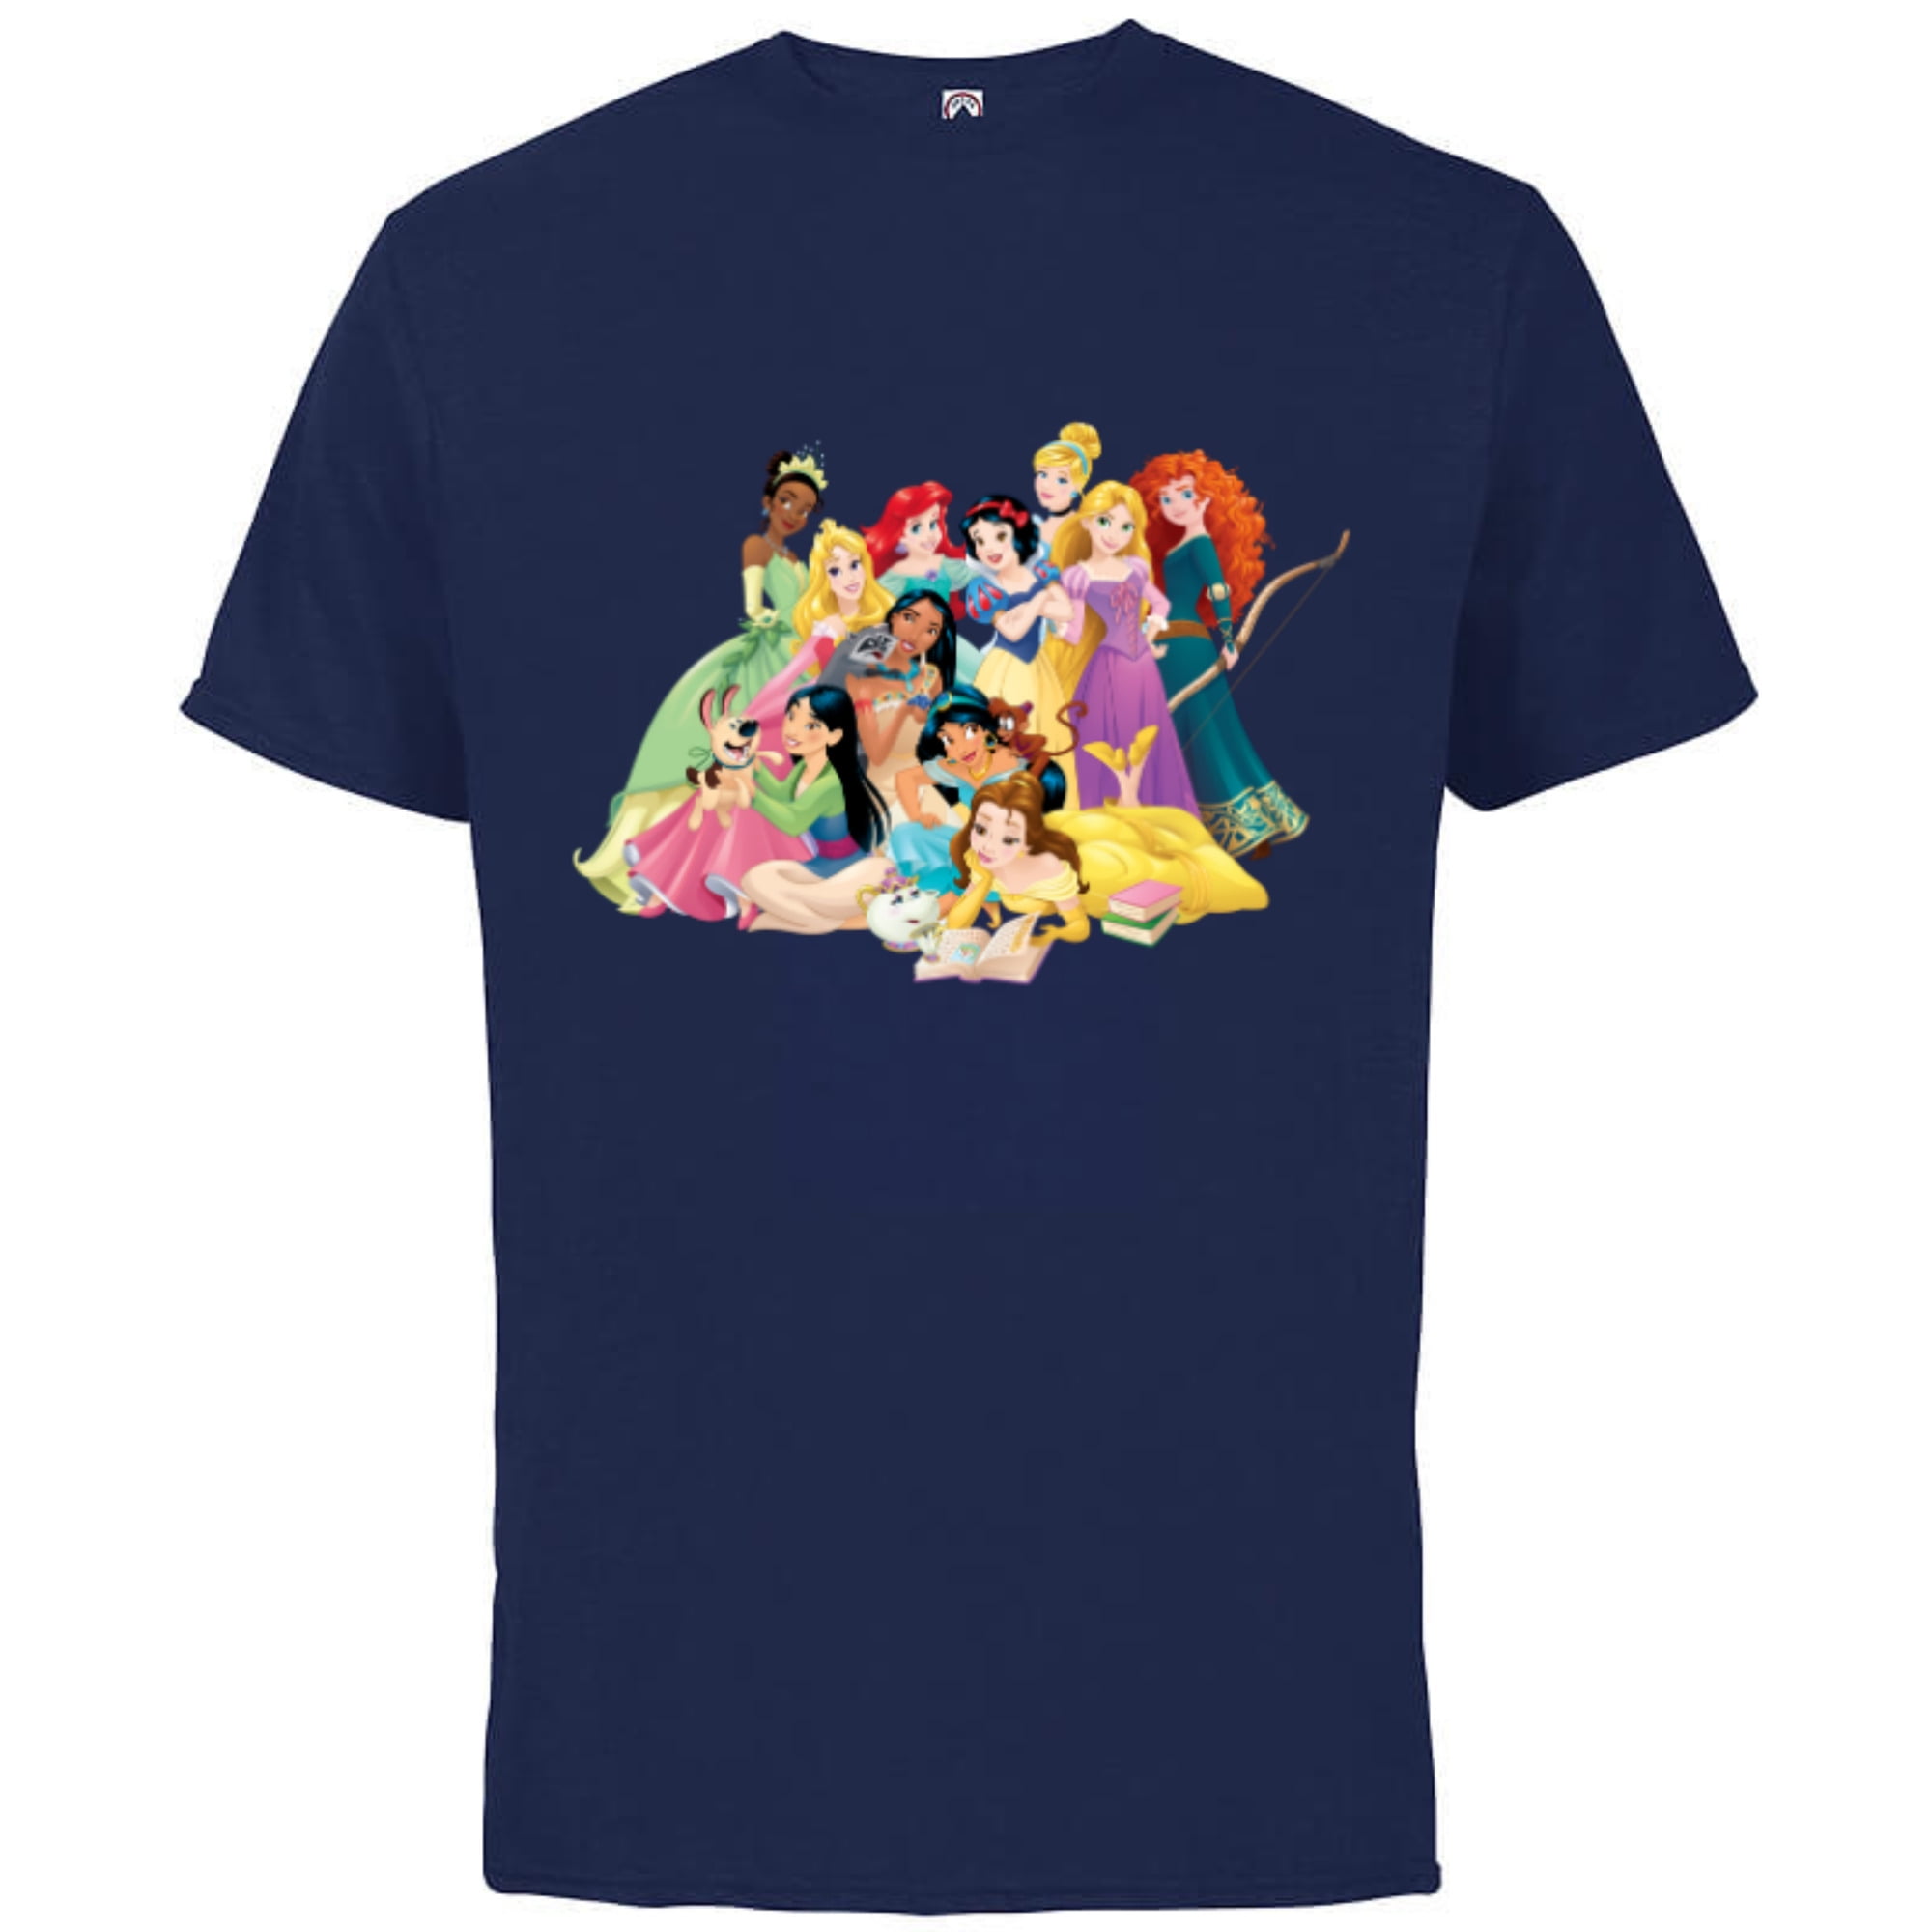 Disney Princess Group Photo - Short Sleeve Cotton T-Shirt for Adults-  Customized-Athletic Navy